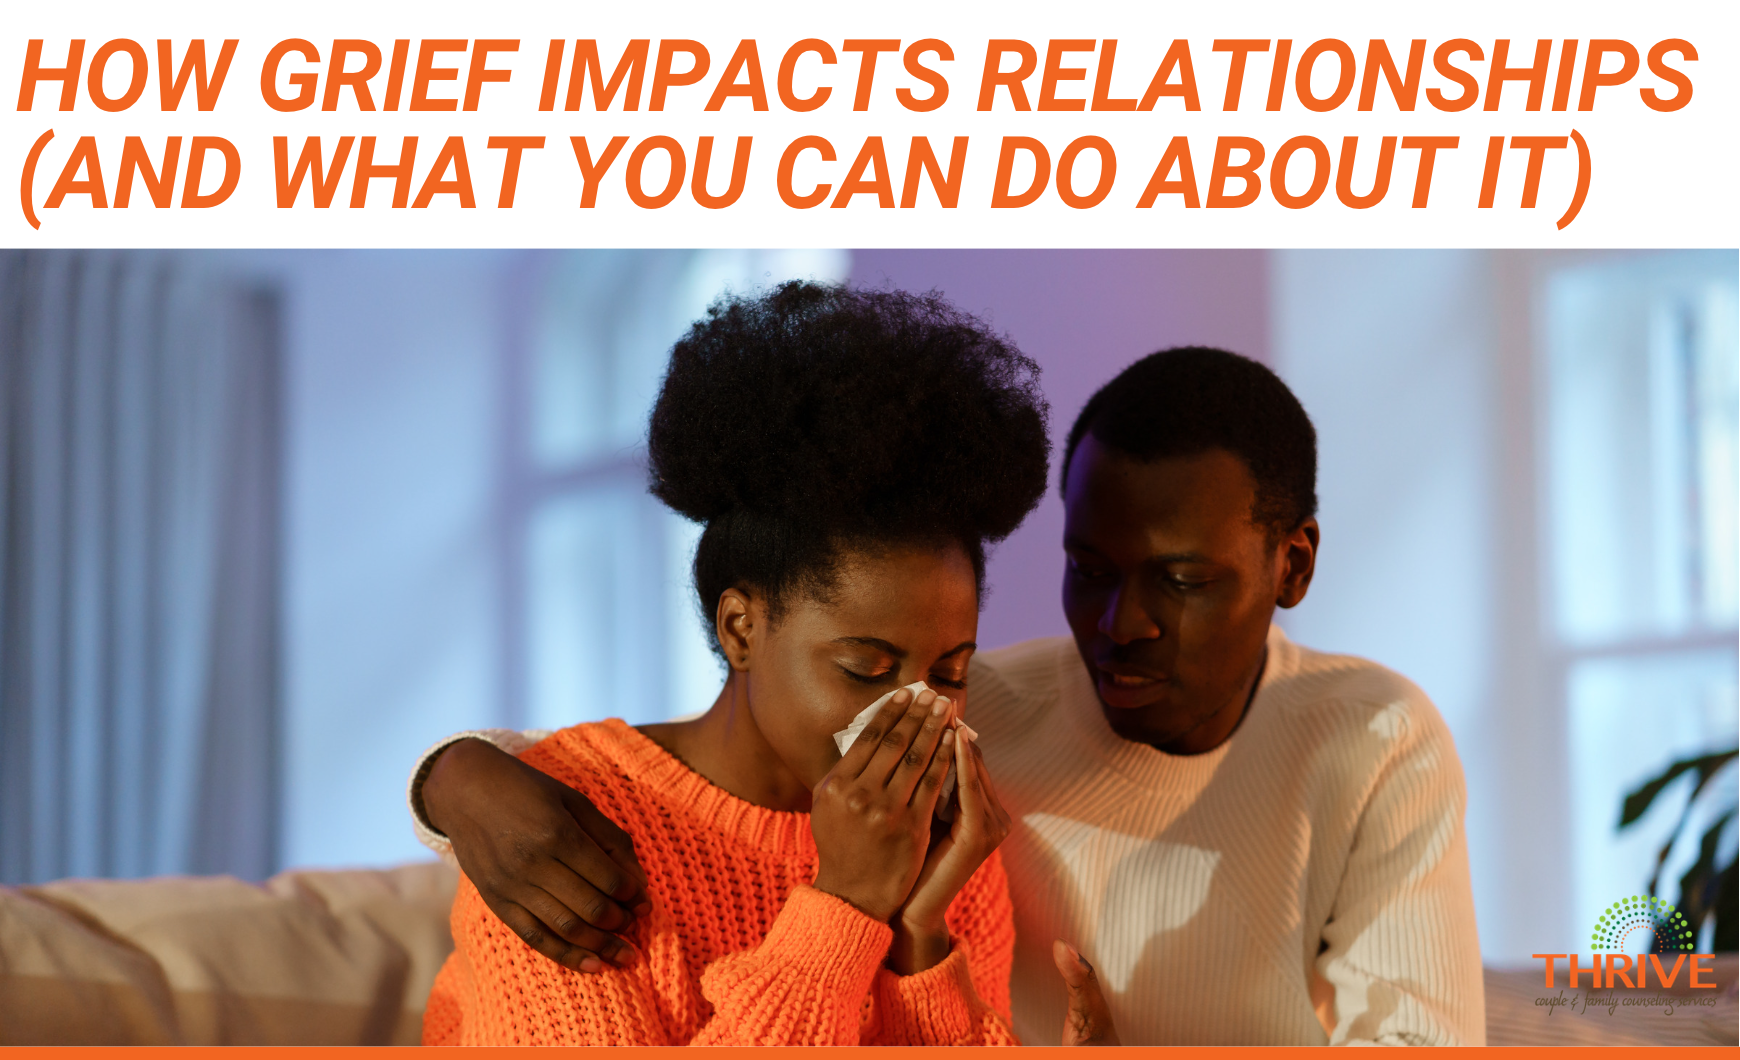 A graphic that reads "How Grief Impacts Relationships (And What you can Do About It)" in dark orange text above a stock photo of a Black couple on a couch. The man, on the right, has his arm around the woman who is crying into a tissue. In the bottom right corner is the logo of Thrive Couple & Family Counseling Services.